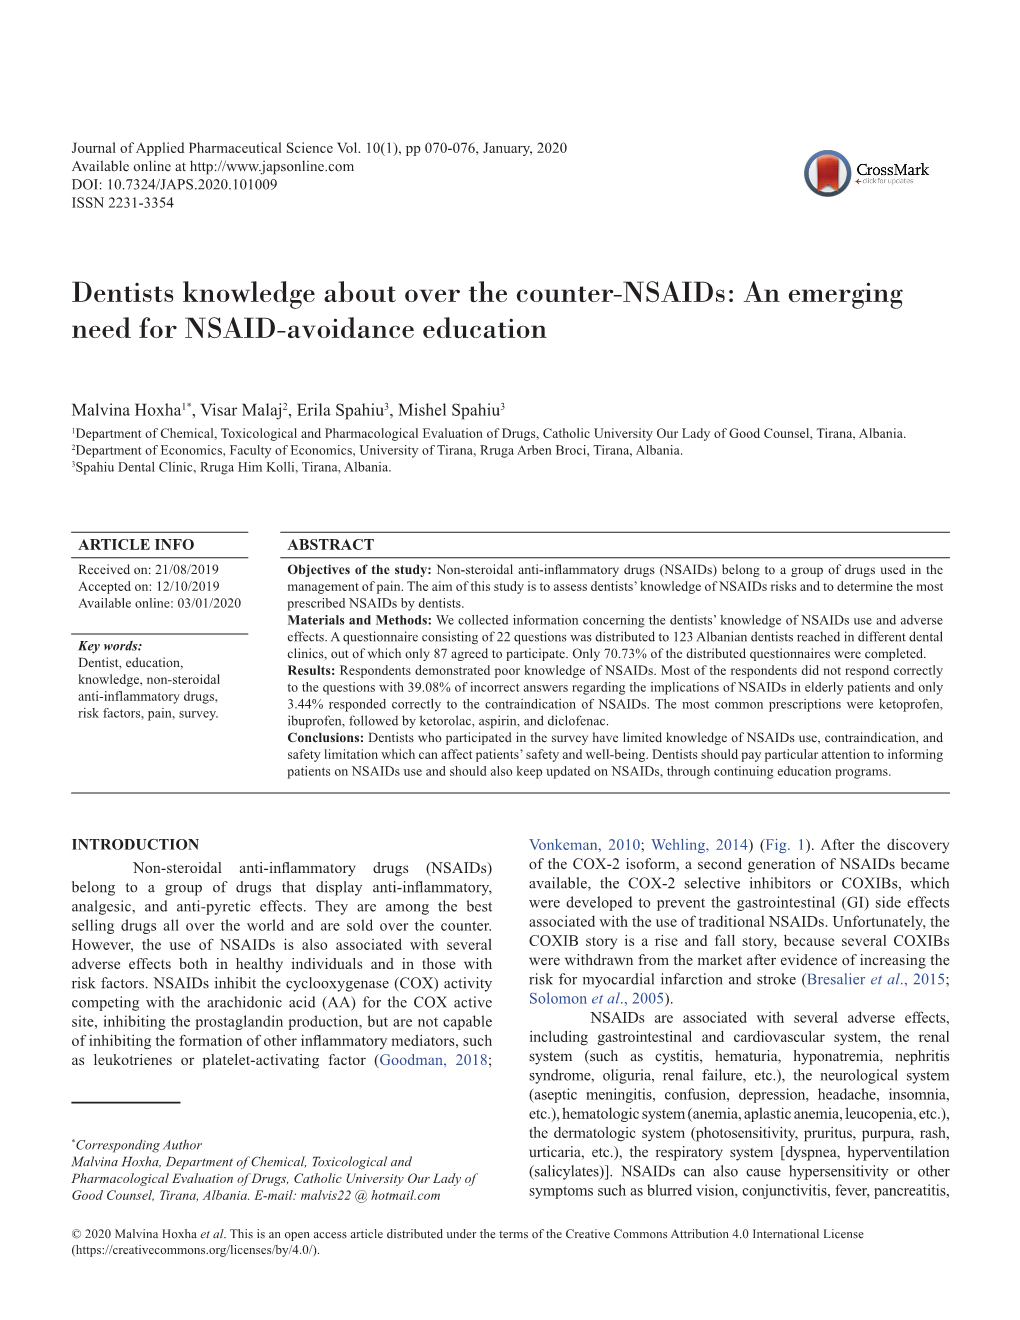 Dentists Knowledge About Over the Counter-Nsaids: an Emerging Need for NSAID-Avoidance Education